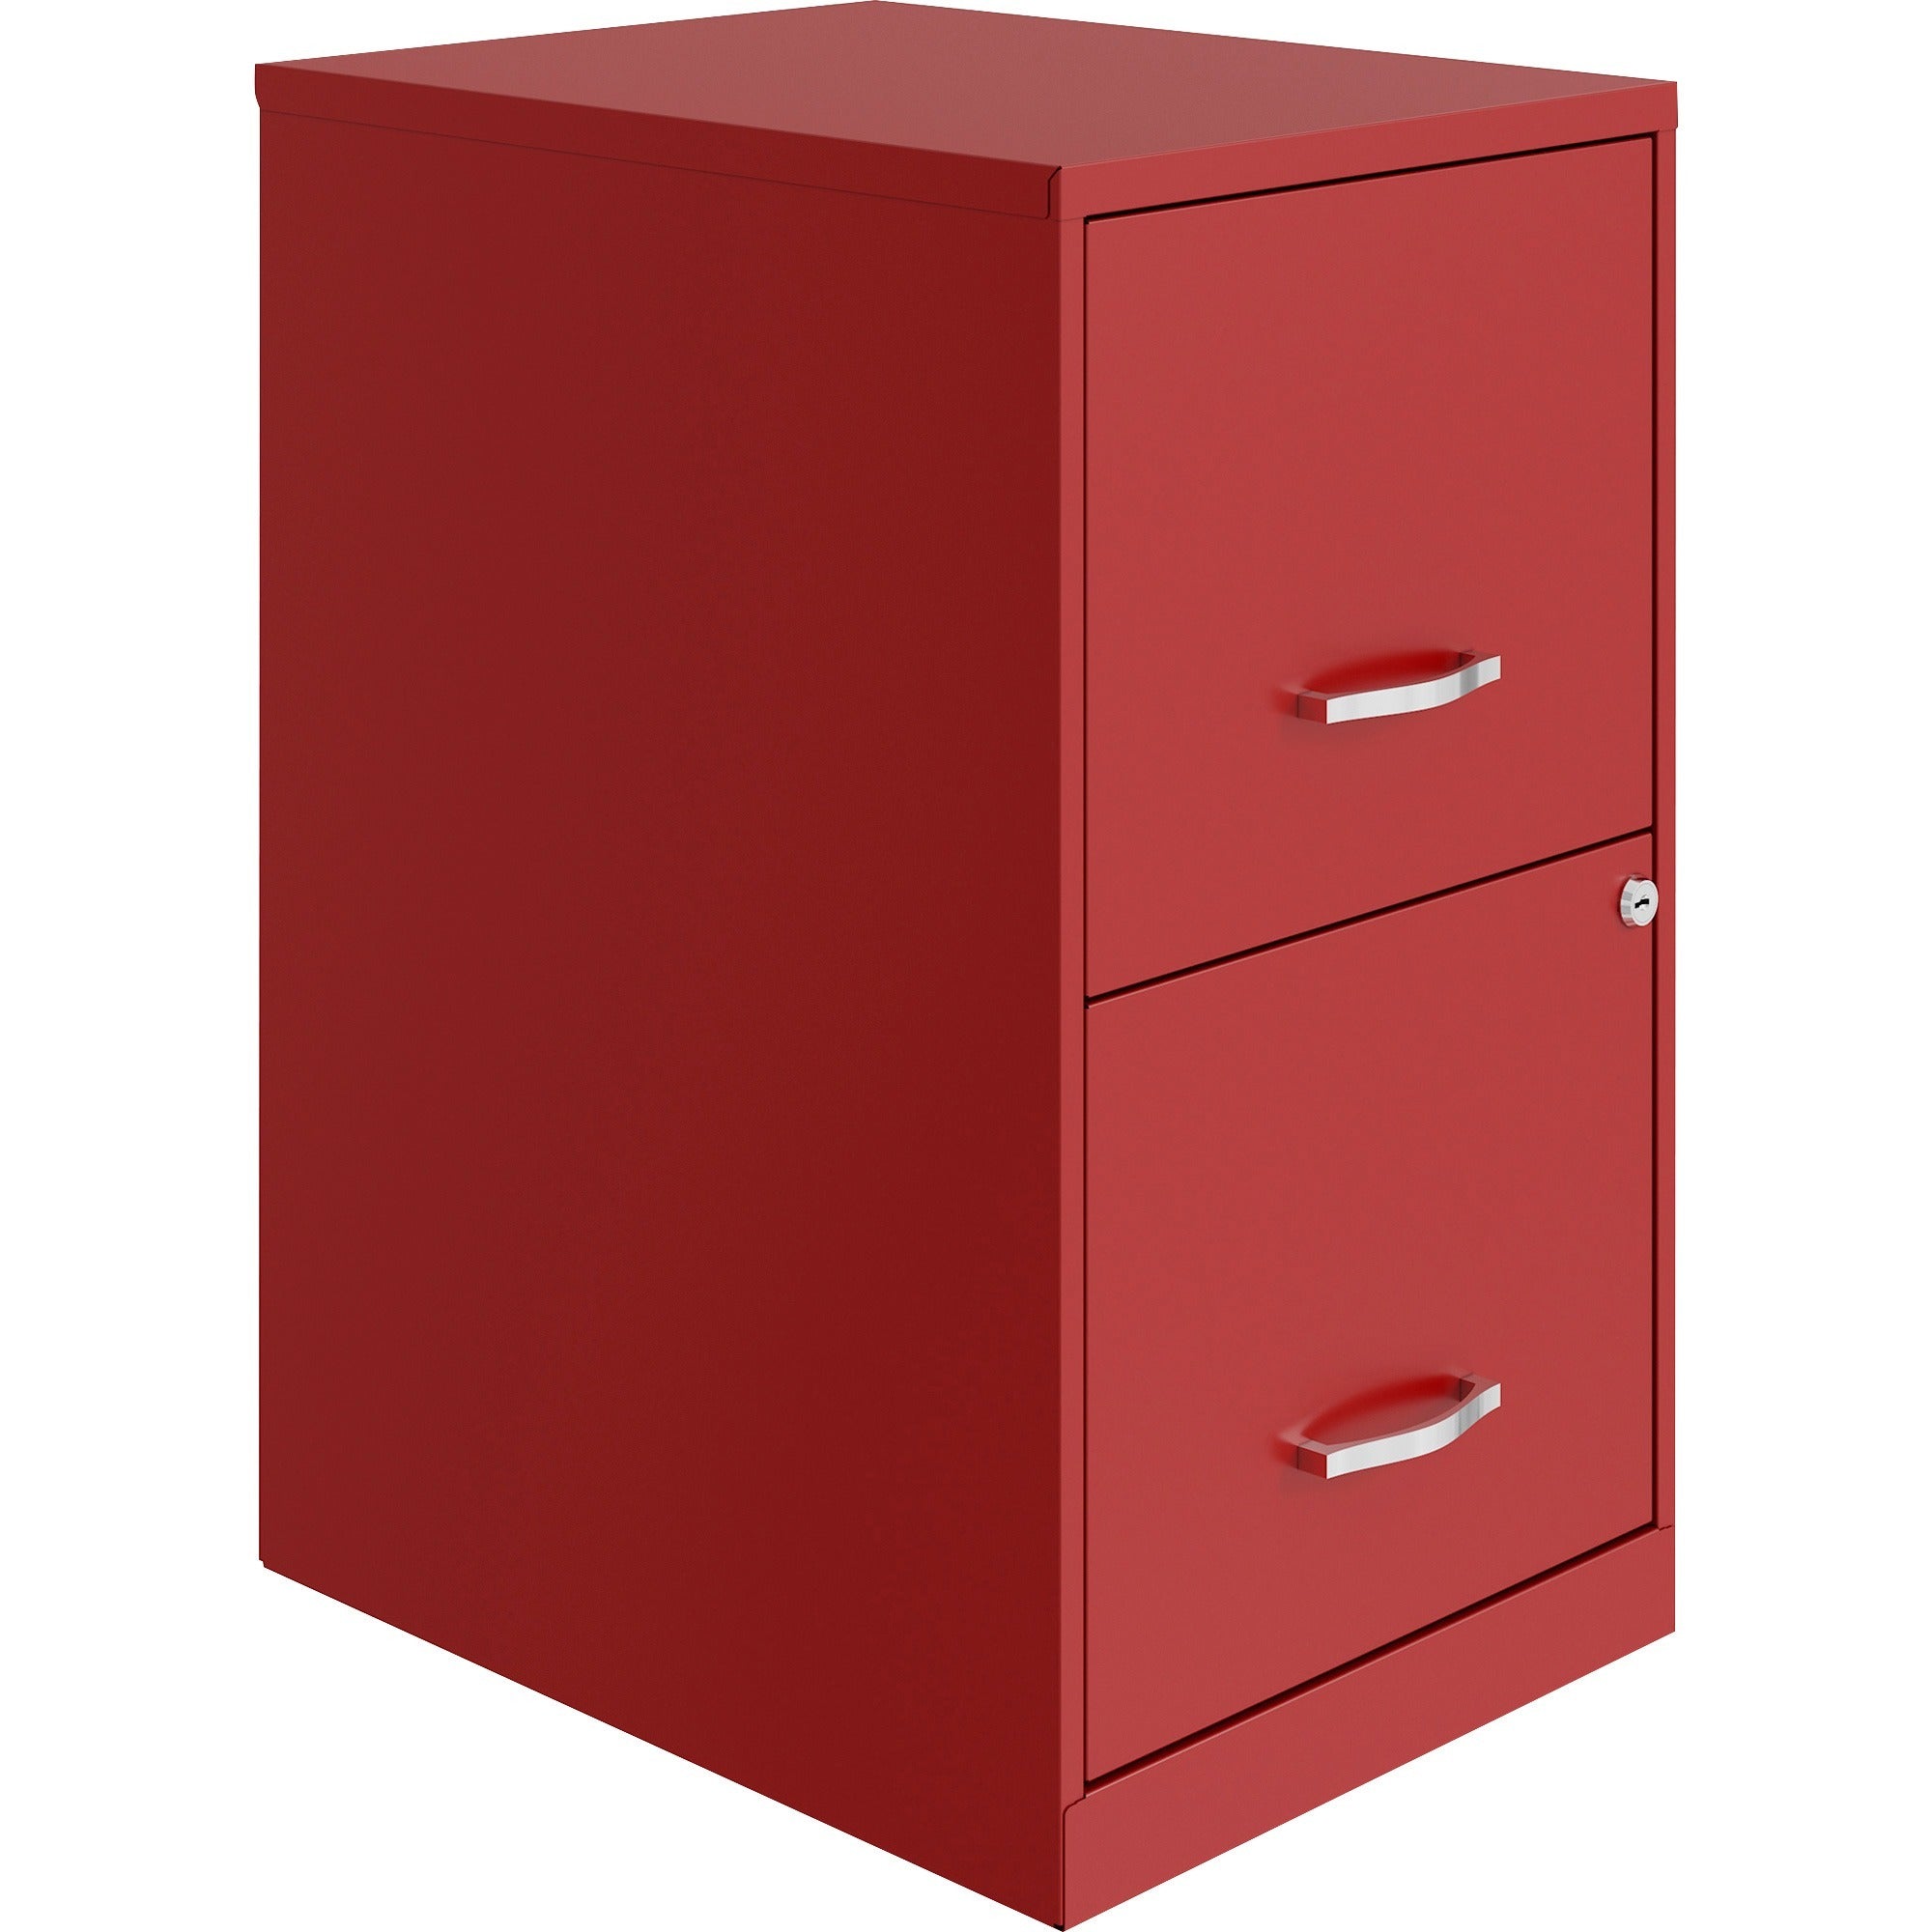 nusparc-file-cabinet-142-x-18-x-245-2-x-drawers-for-file-letter-vertical-locking-drawer-glide-suspension-nonporous-surface-red-baked-enamel-steel-recycled_nprvf218aard - 1